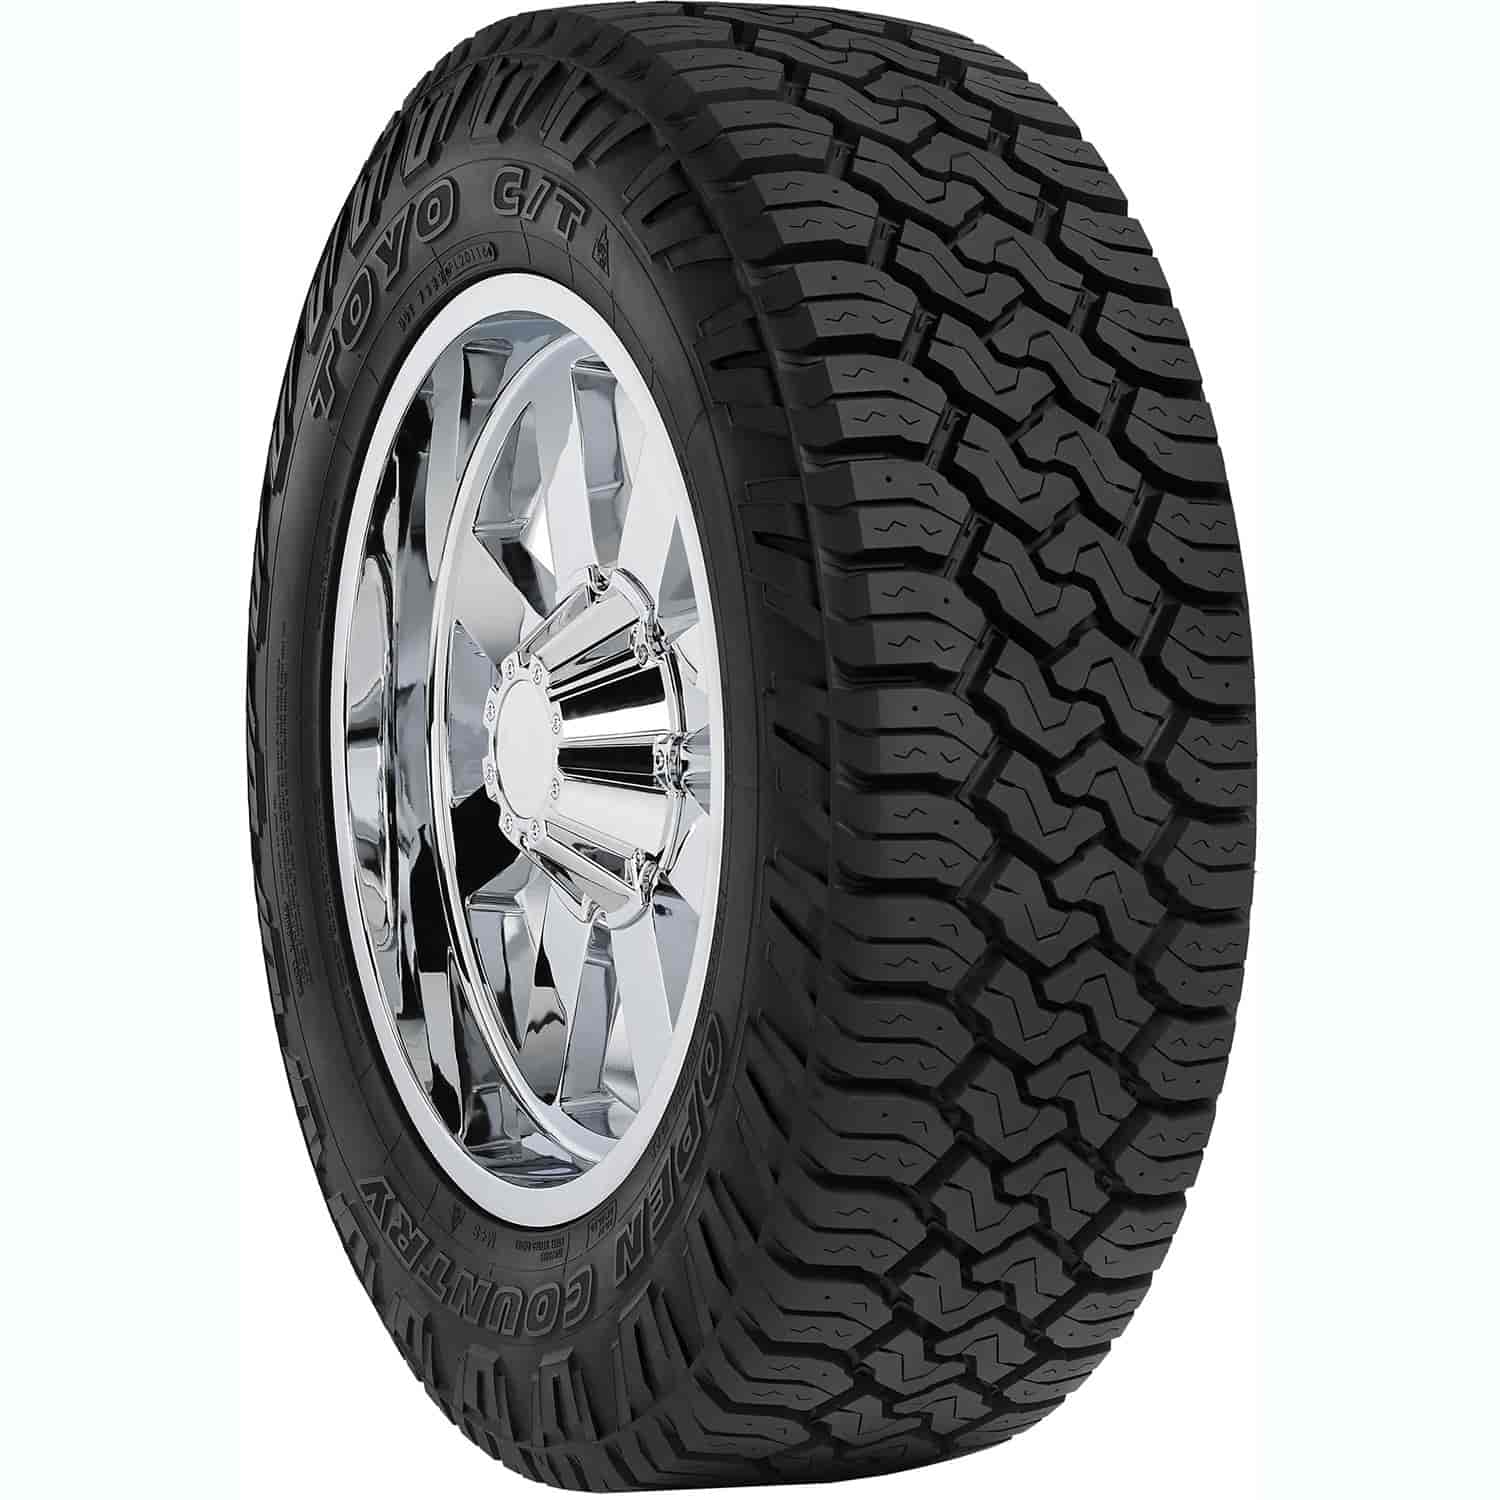 Open Country C/T Tire LT235/80R17 120/117Q